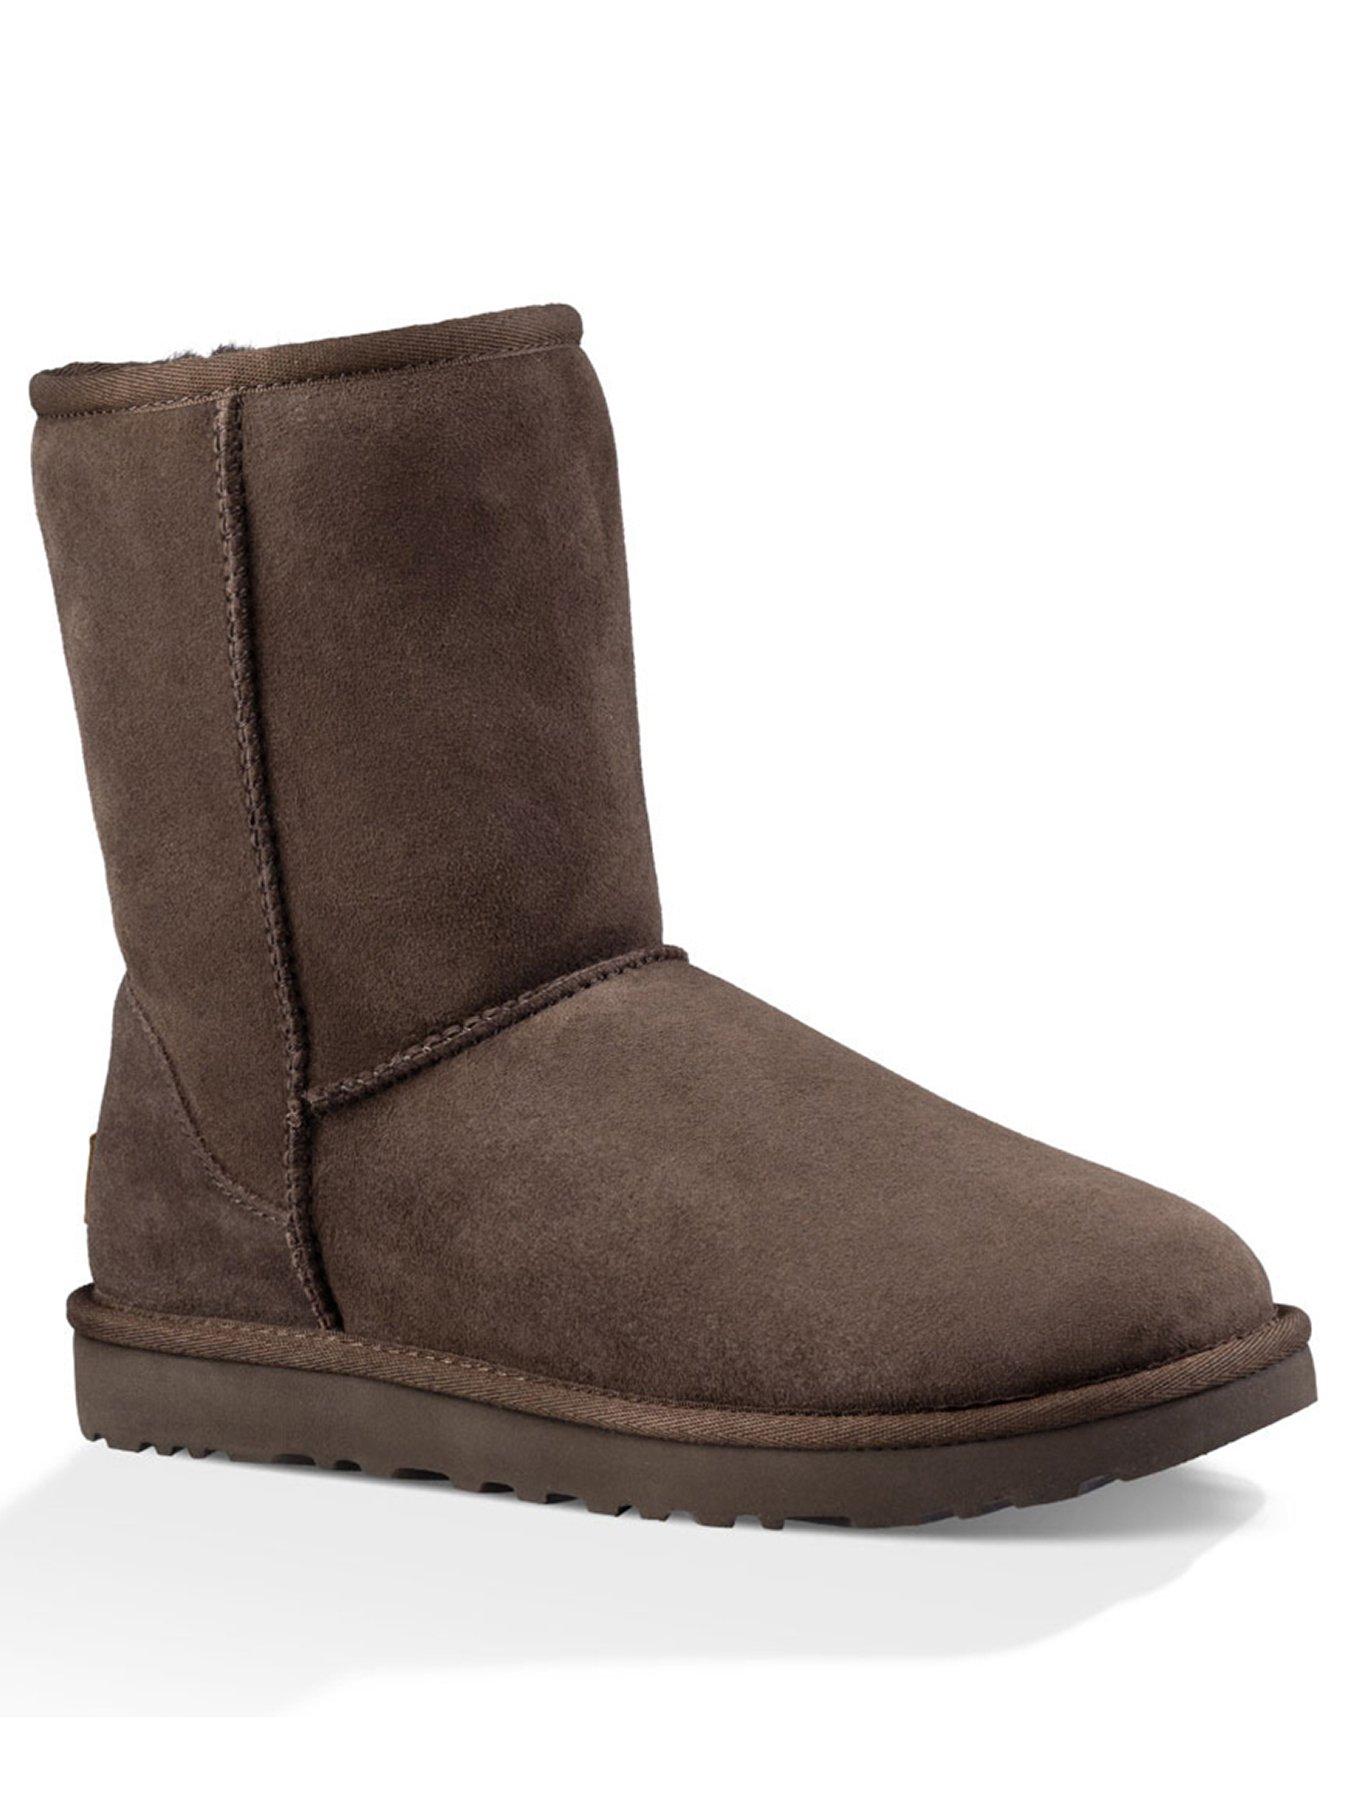 leather uggs sale